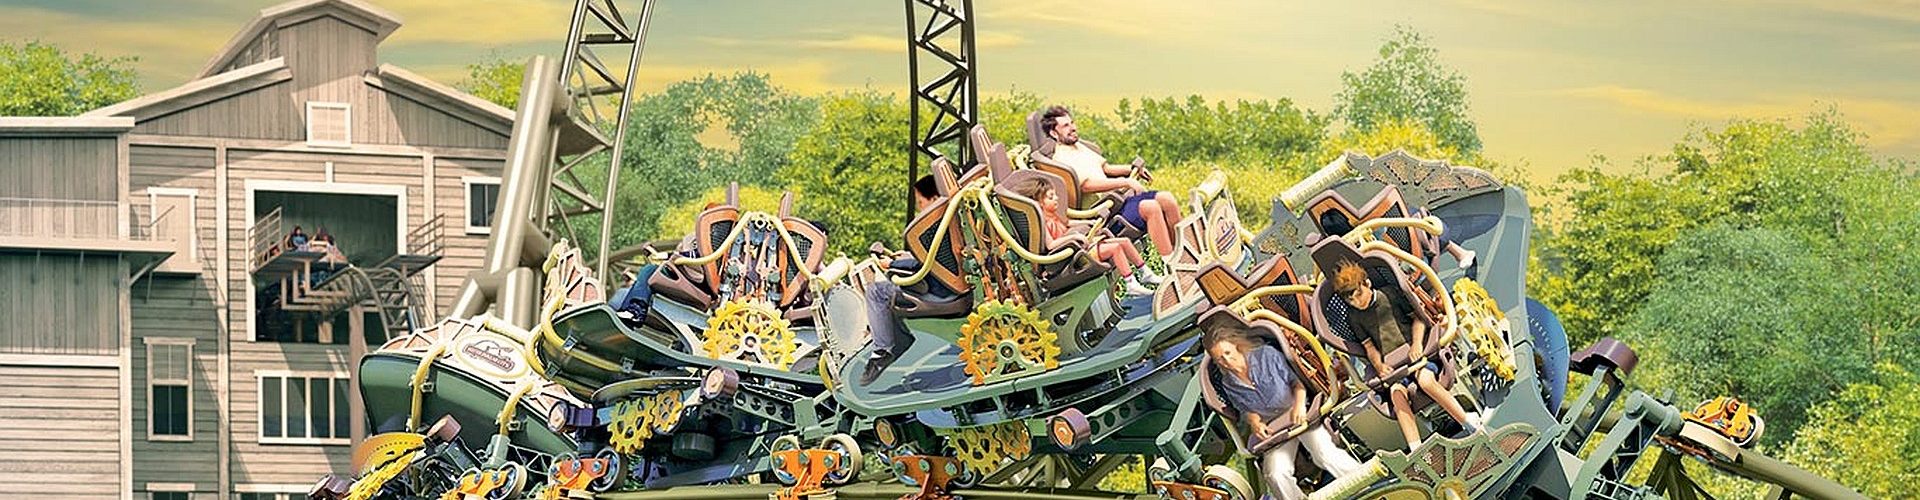 Time Traveler Roller Coaster at Silver Dollar City is Now Open!